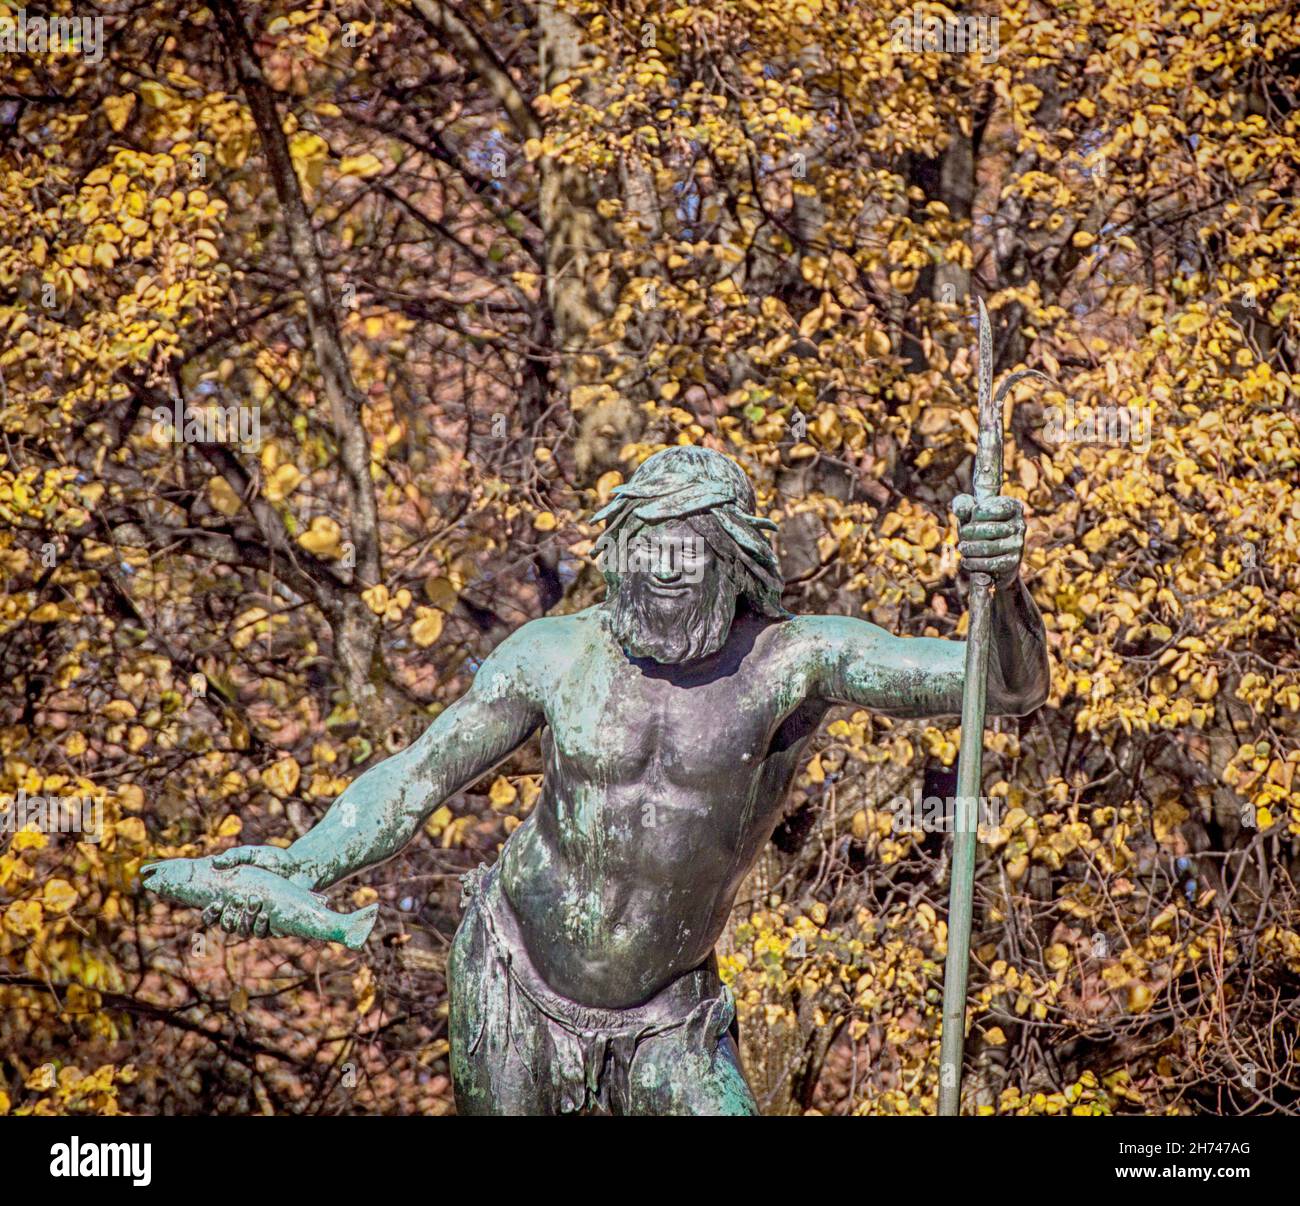 Munich, the neo-baroque bronze statue of  Father Rhine (Vater-Rhein) with a fish in hand, finished in 1903 and placed in 1932 on the Museum island of Stock Photo